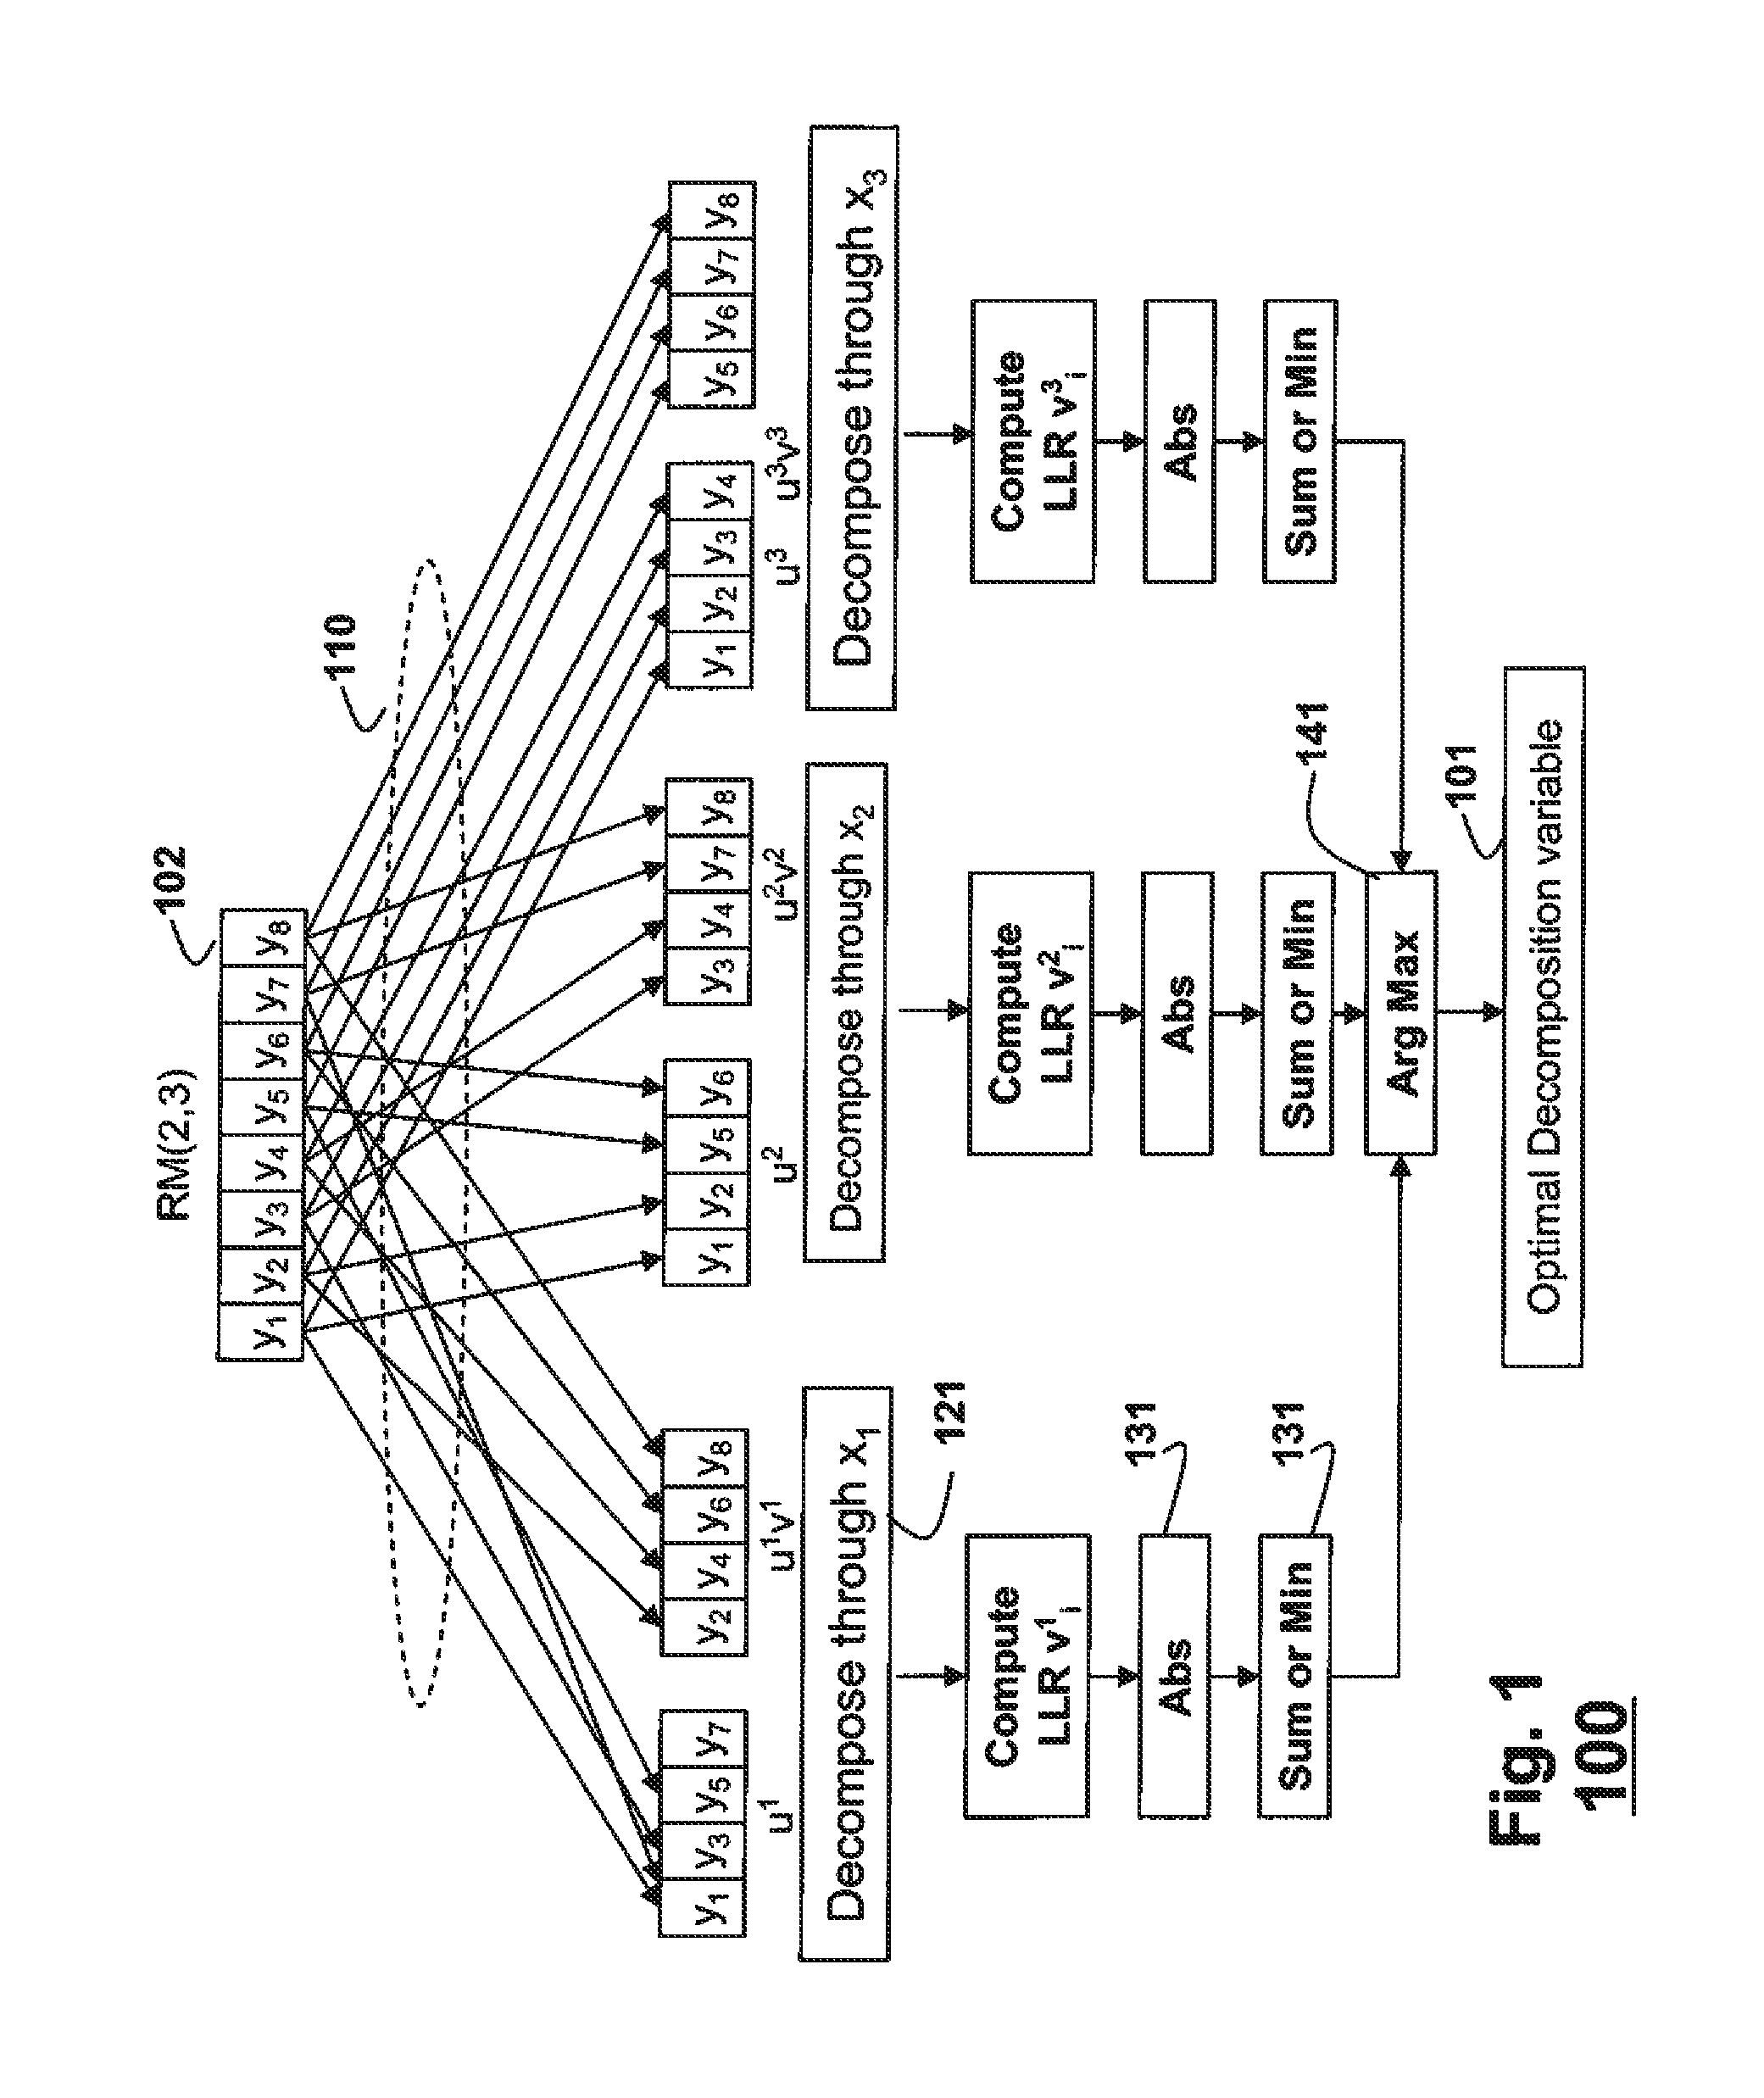 Method for performing soft decision decoding of euclidean space reed-muller codes